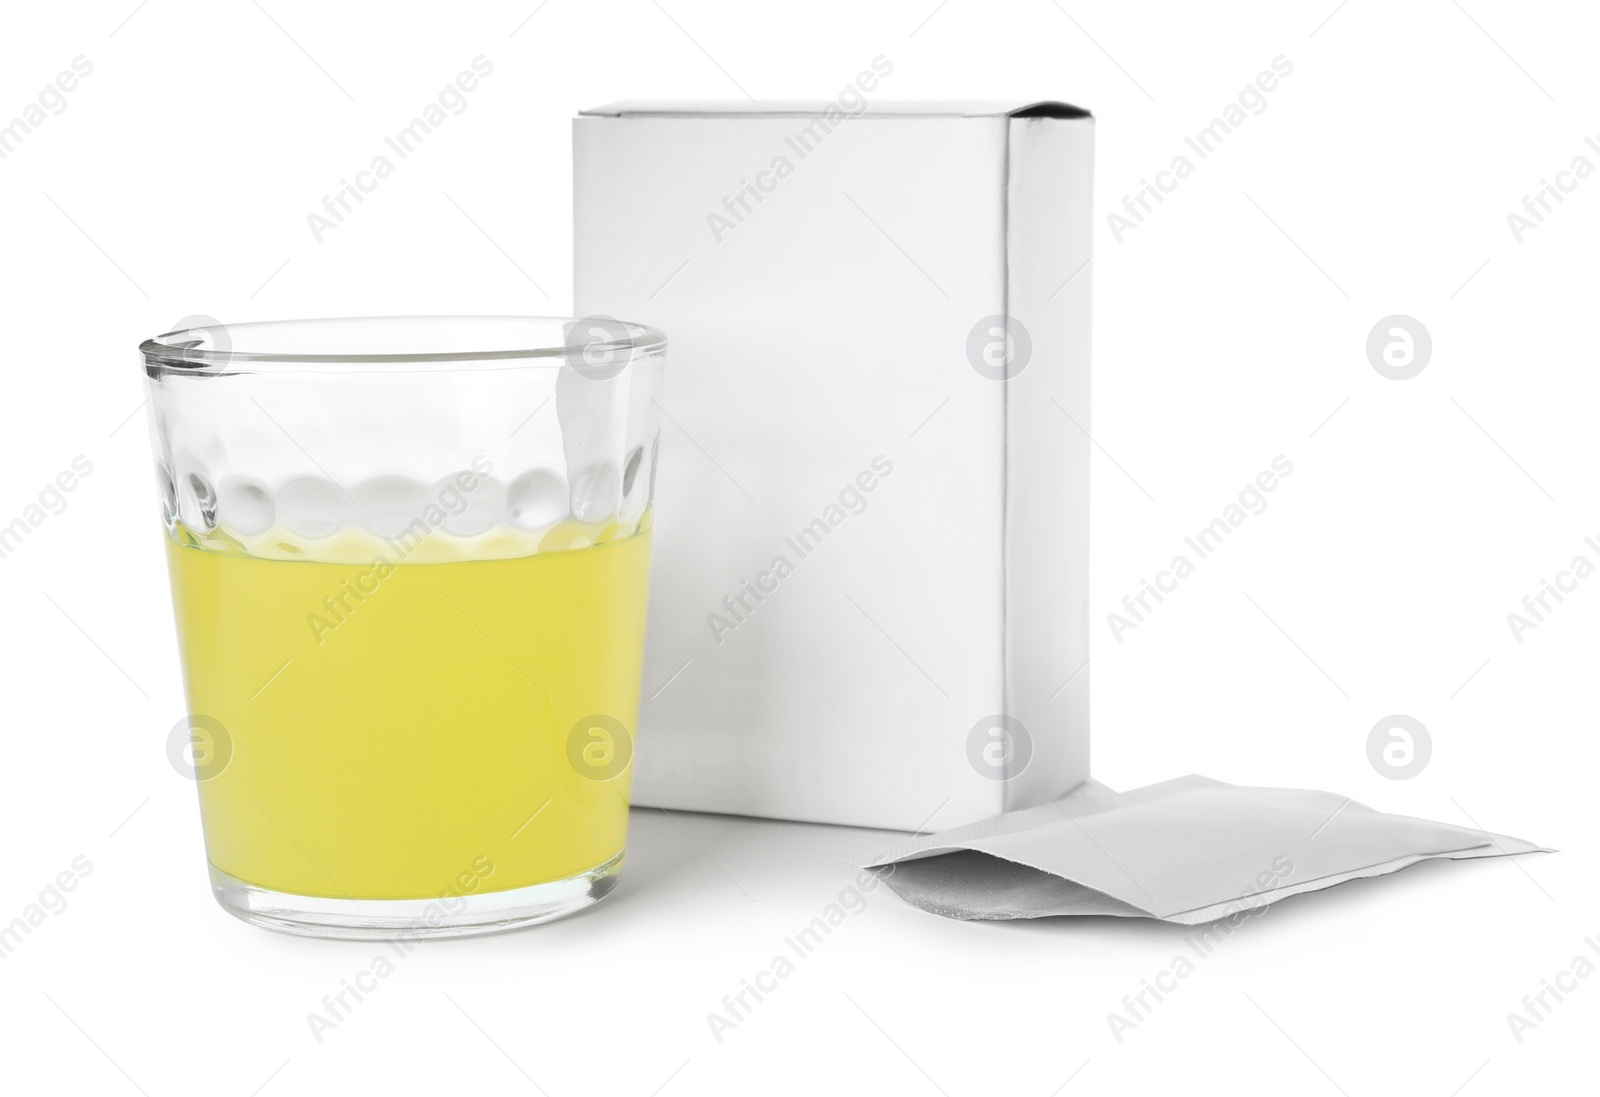 Photo of Box, sachet and glass of dissolved medicine on white background